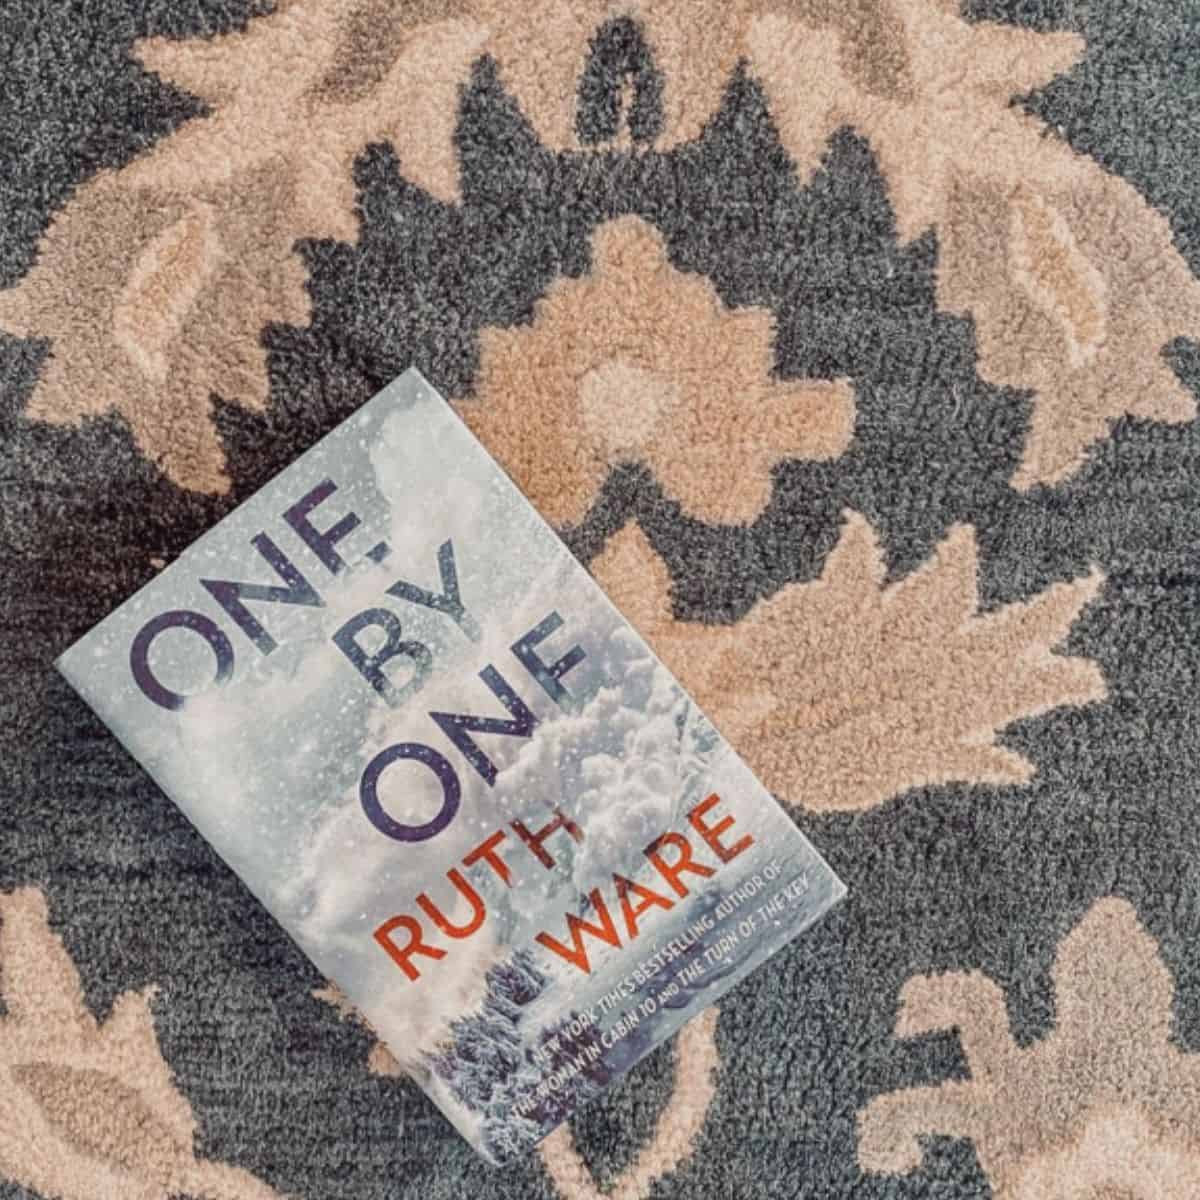 one by one ruth ware on the carpet